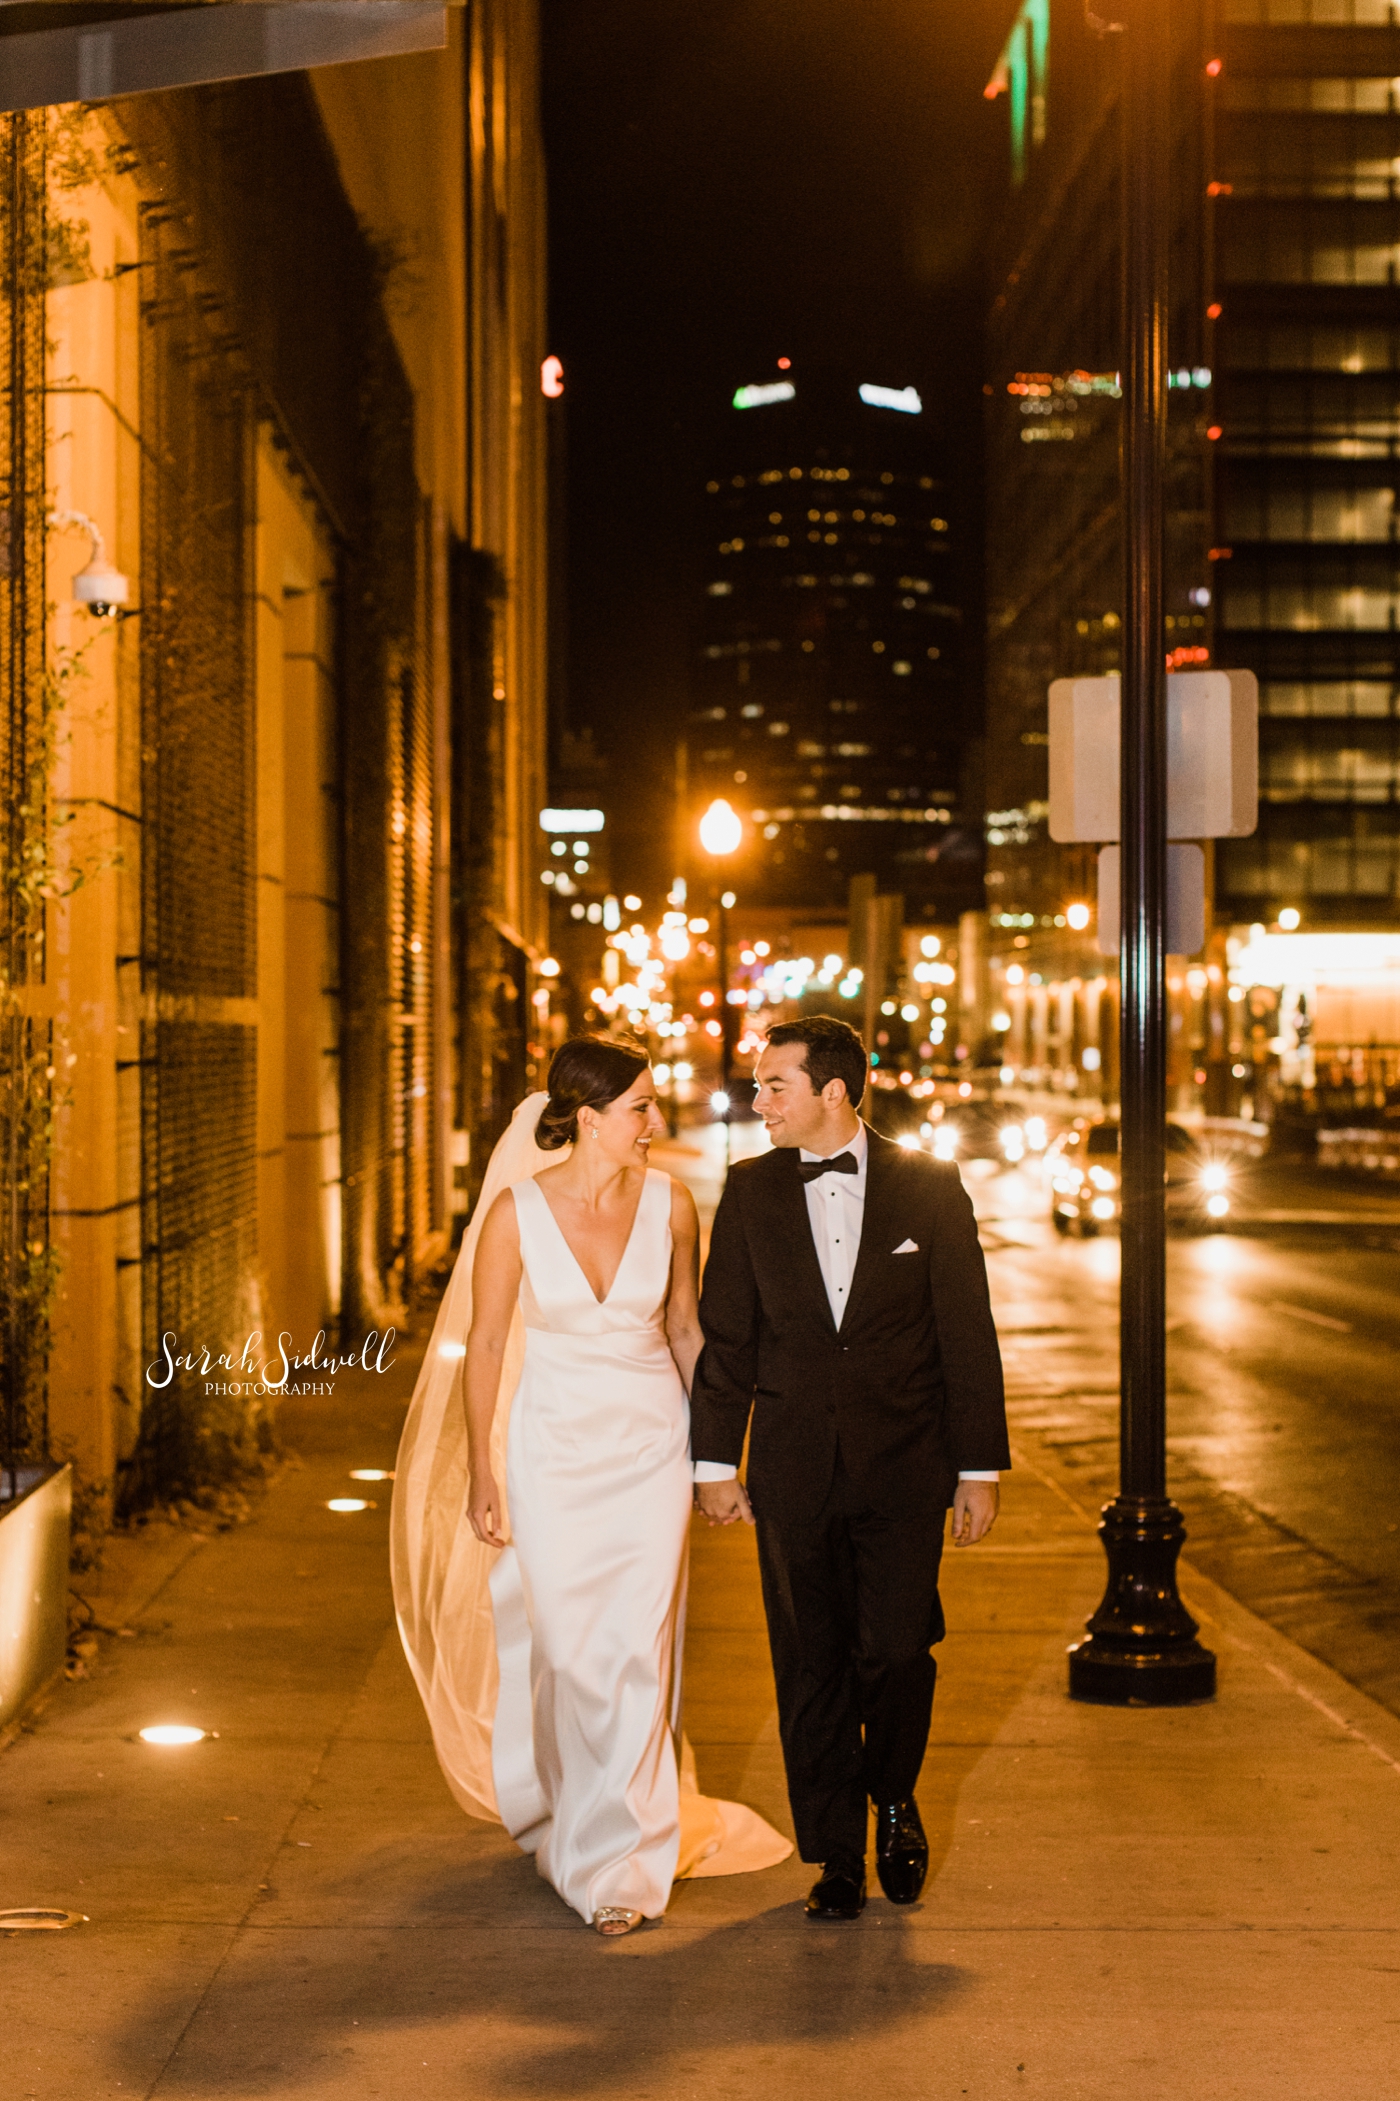 A bride and groom take a walk on a city street | Sarah Sidwell Photography | The Bell Tower